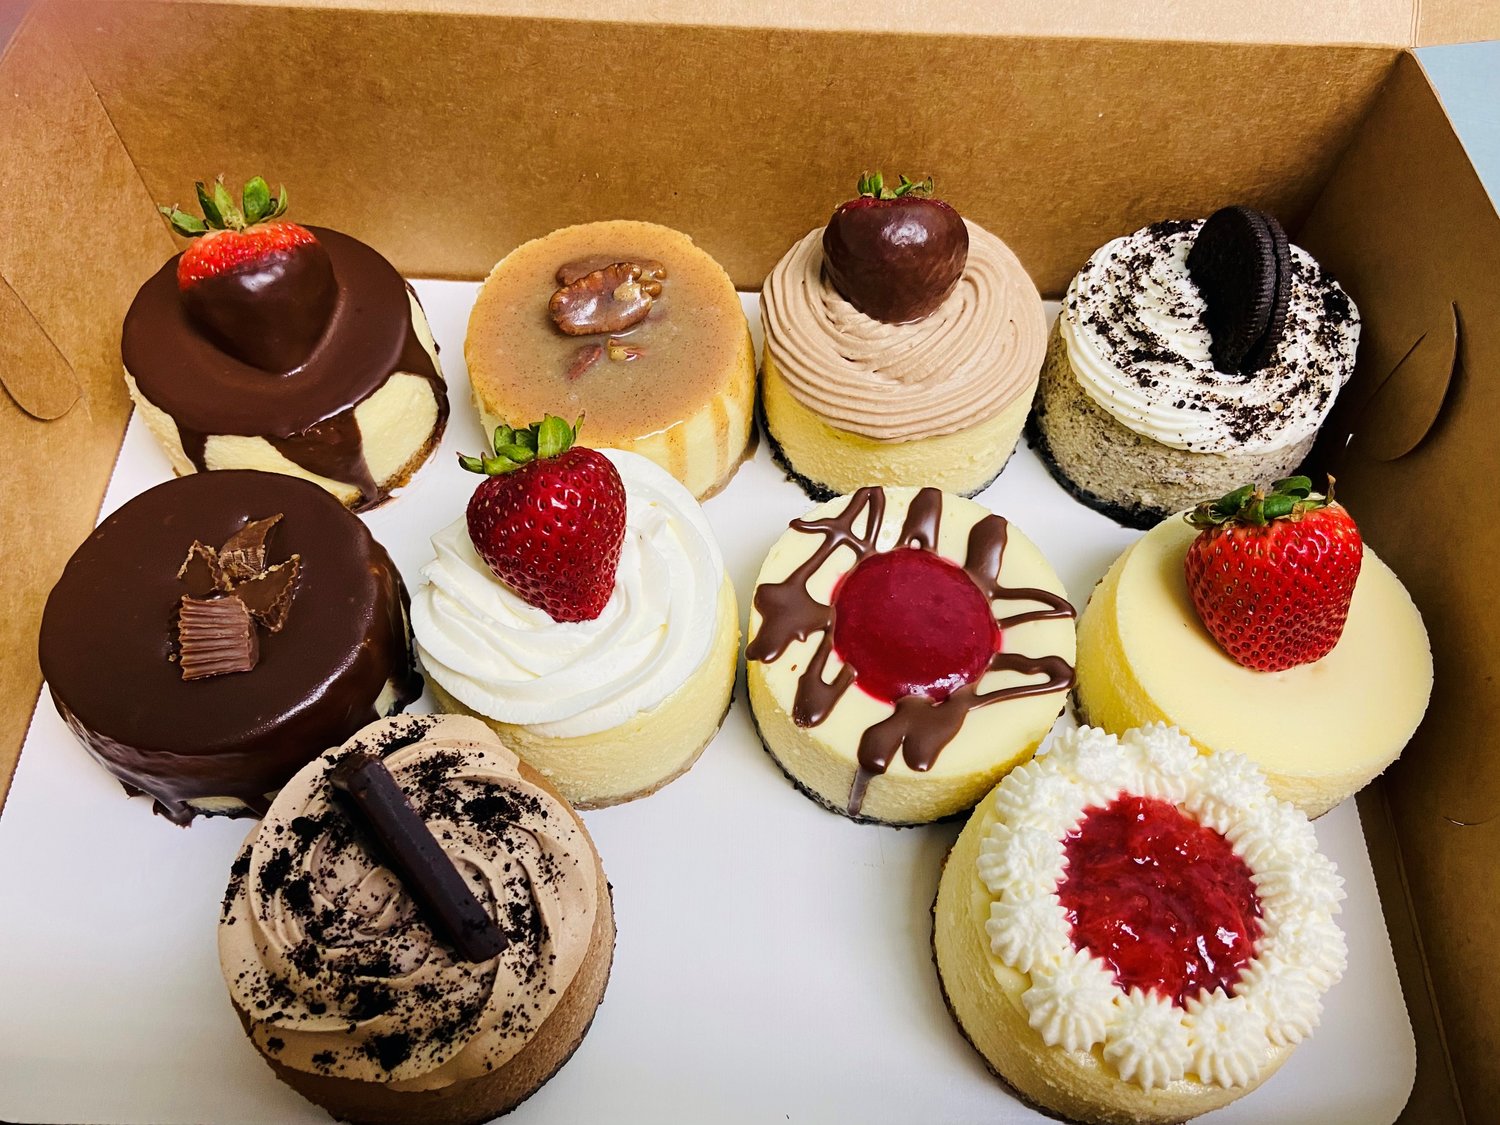 Some delicious cheesecakes from Dainty Cakes